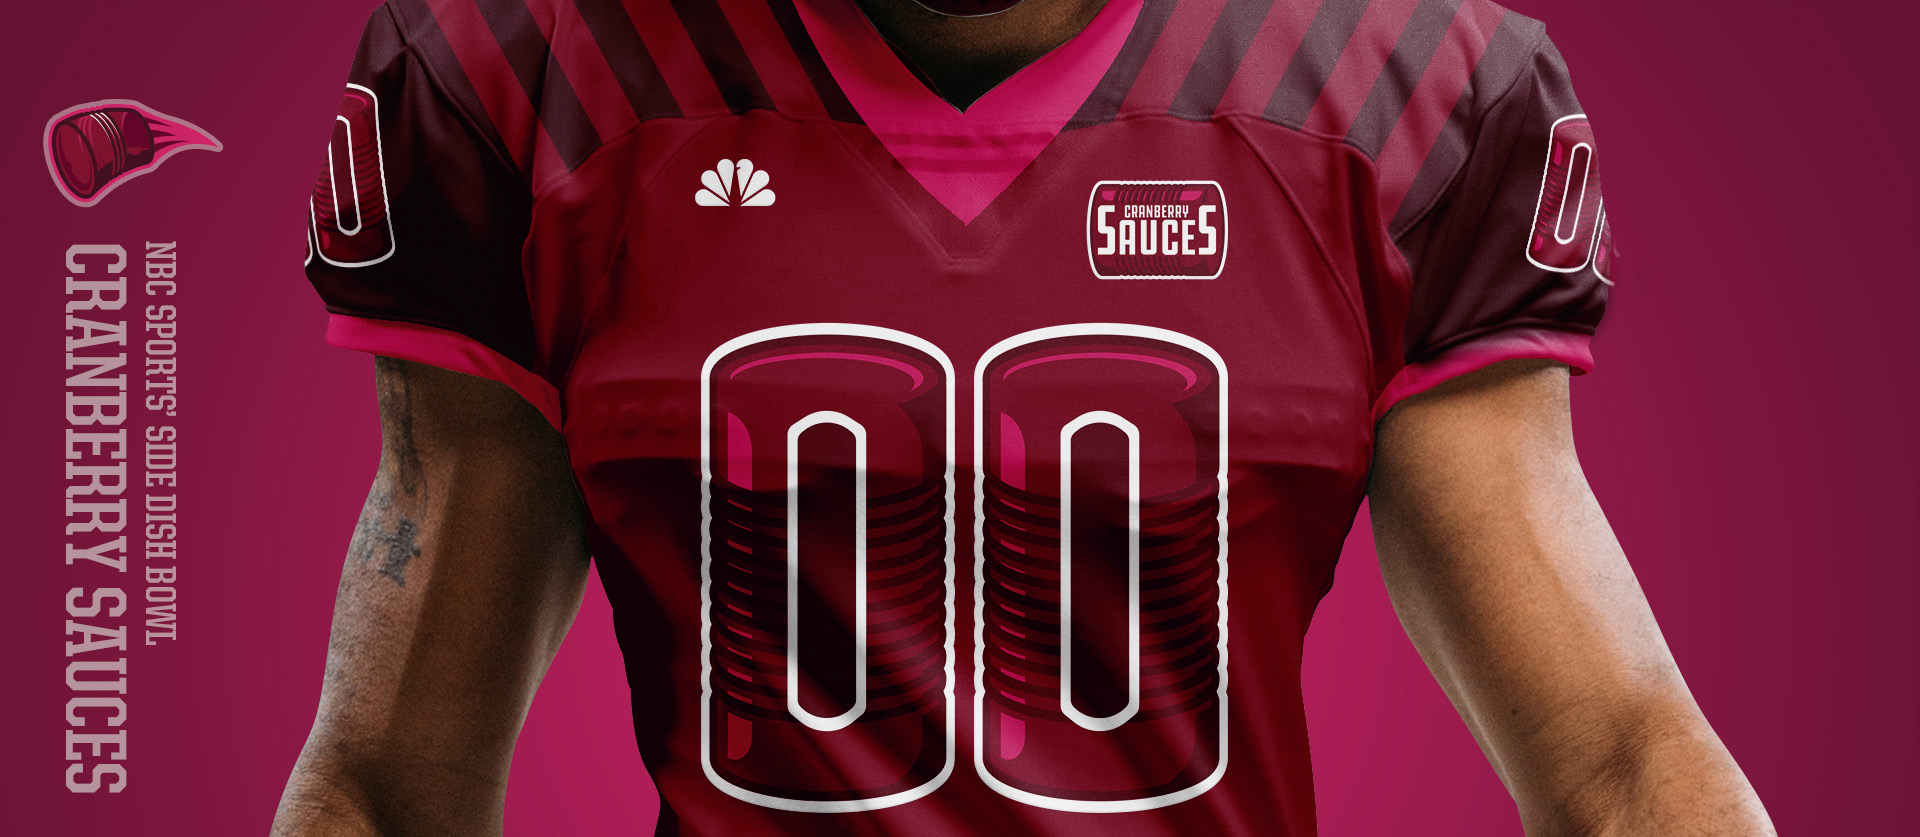 Cranberry Sauces Front - Football Uniform Design for NBC Sports Thanksgiving Side Dish Bowl